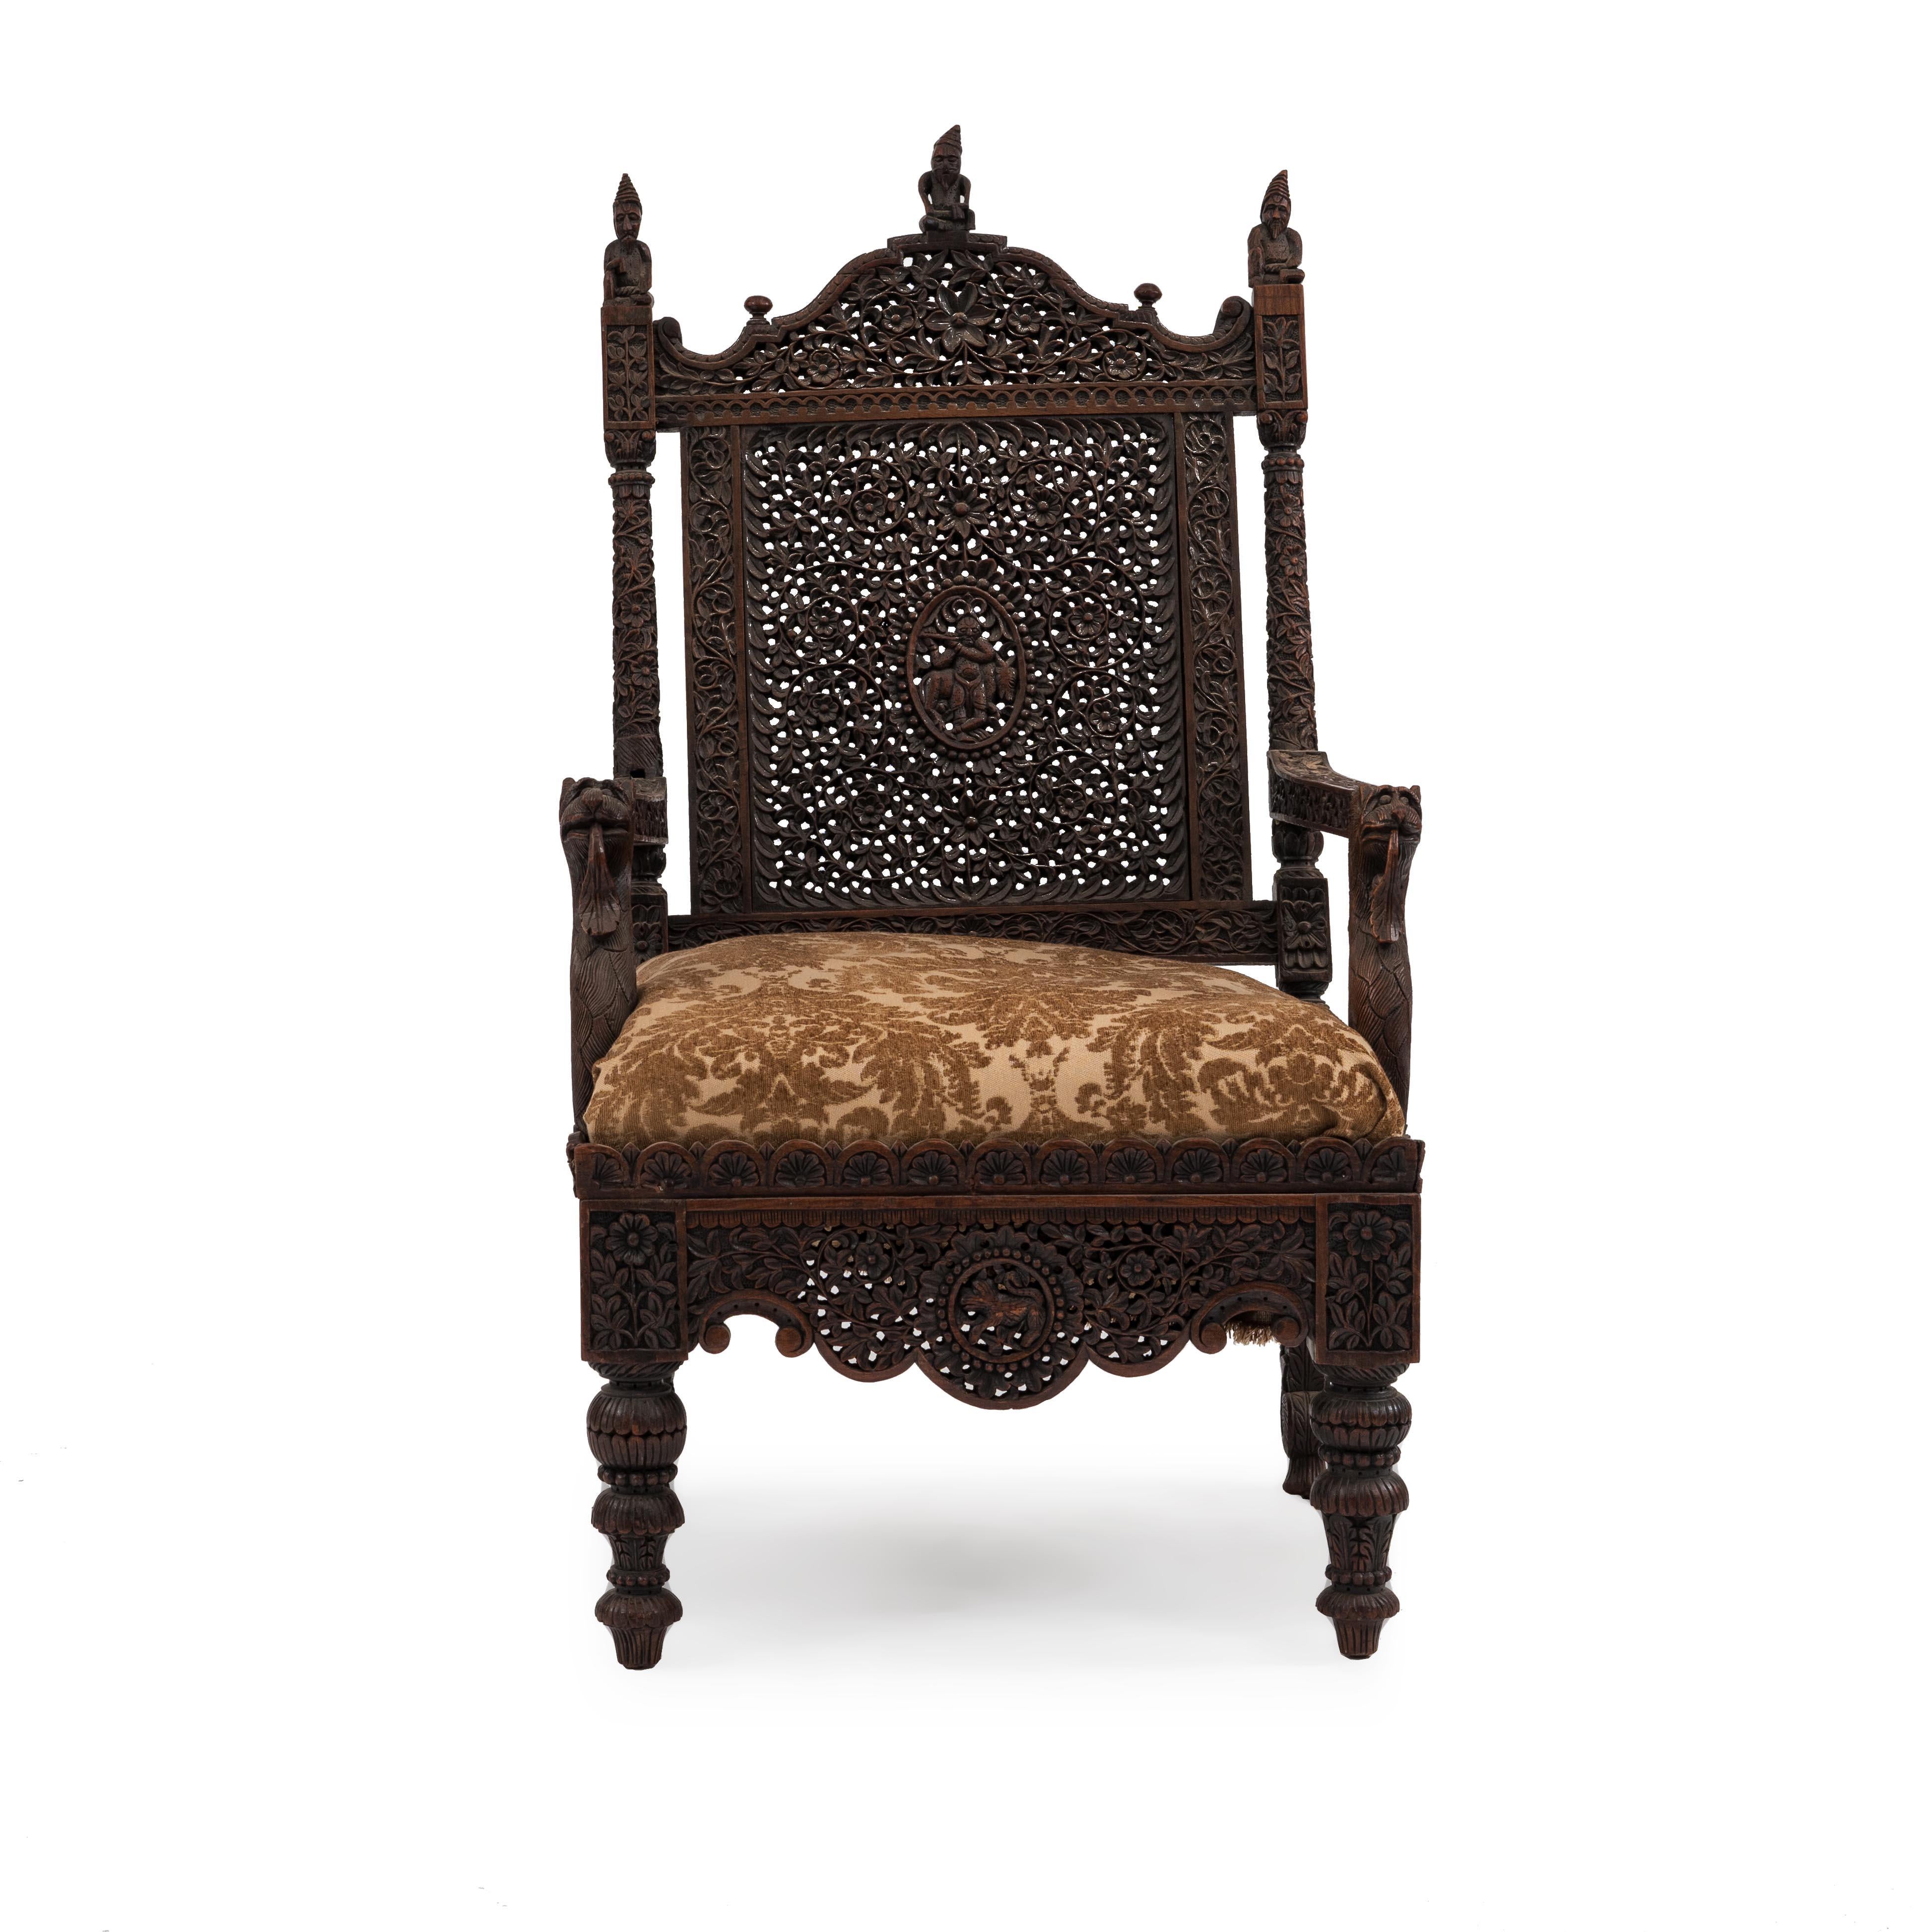 Asian Burmese style carved walnut filigree open armchair with lion arms and cushion seat, (19th century).